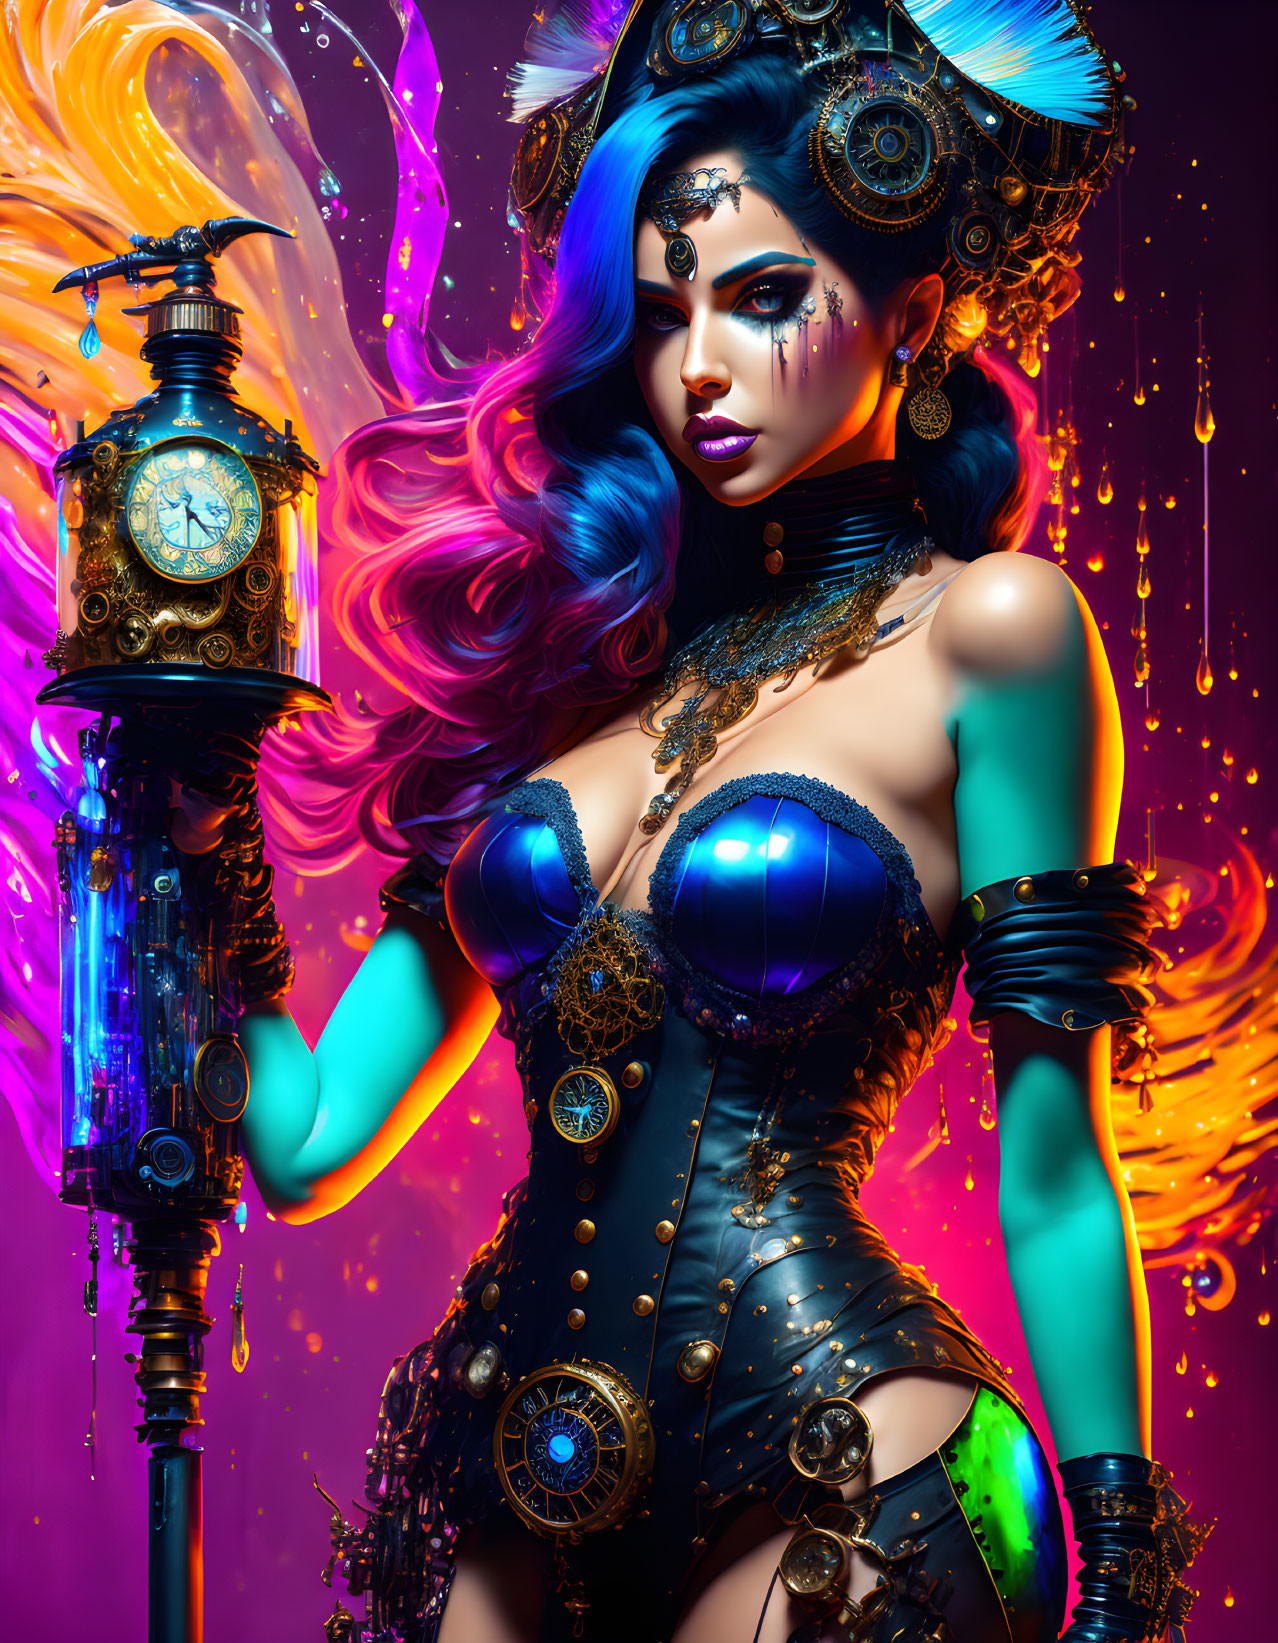 Steampunk-style illustration of woman with gear accessories and blue hair on purple background